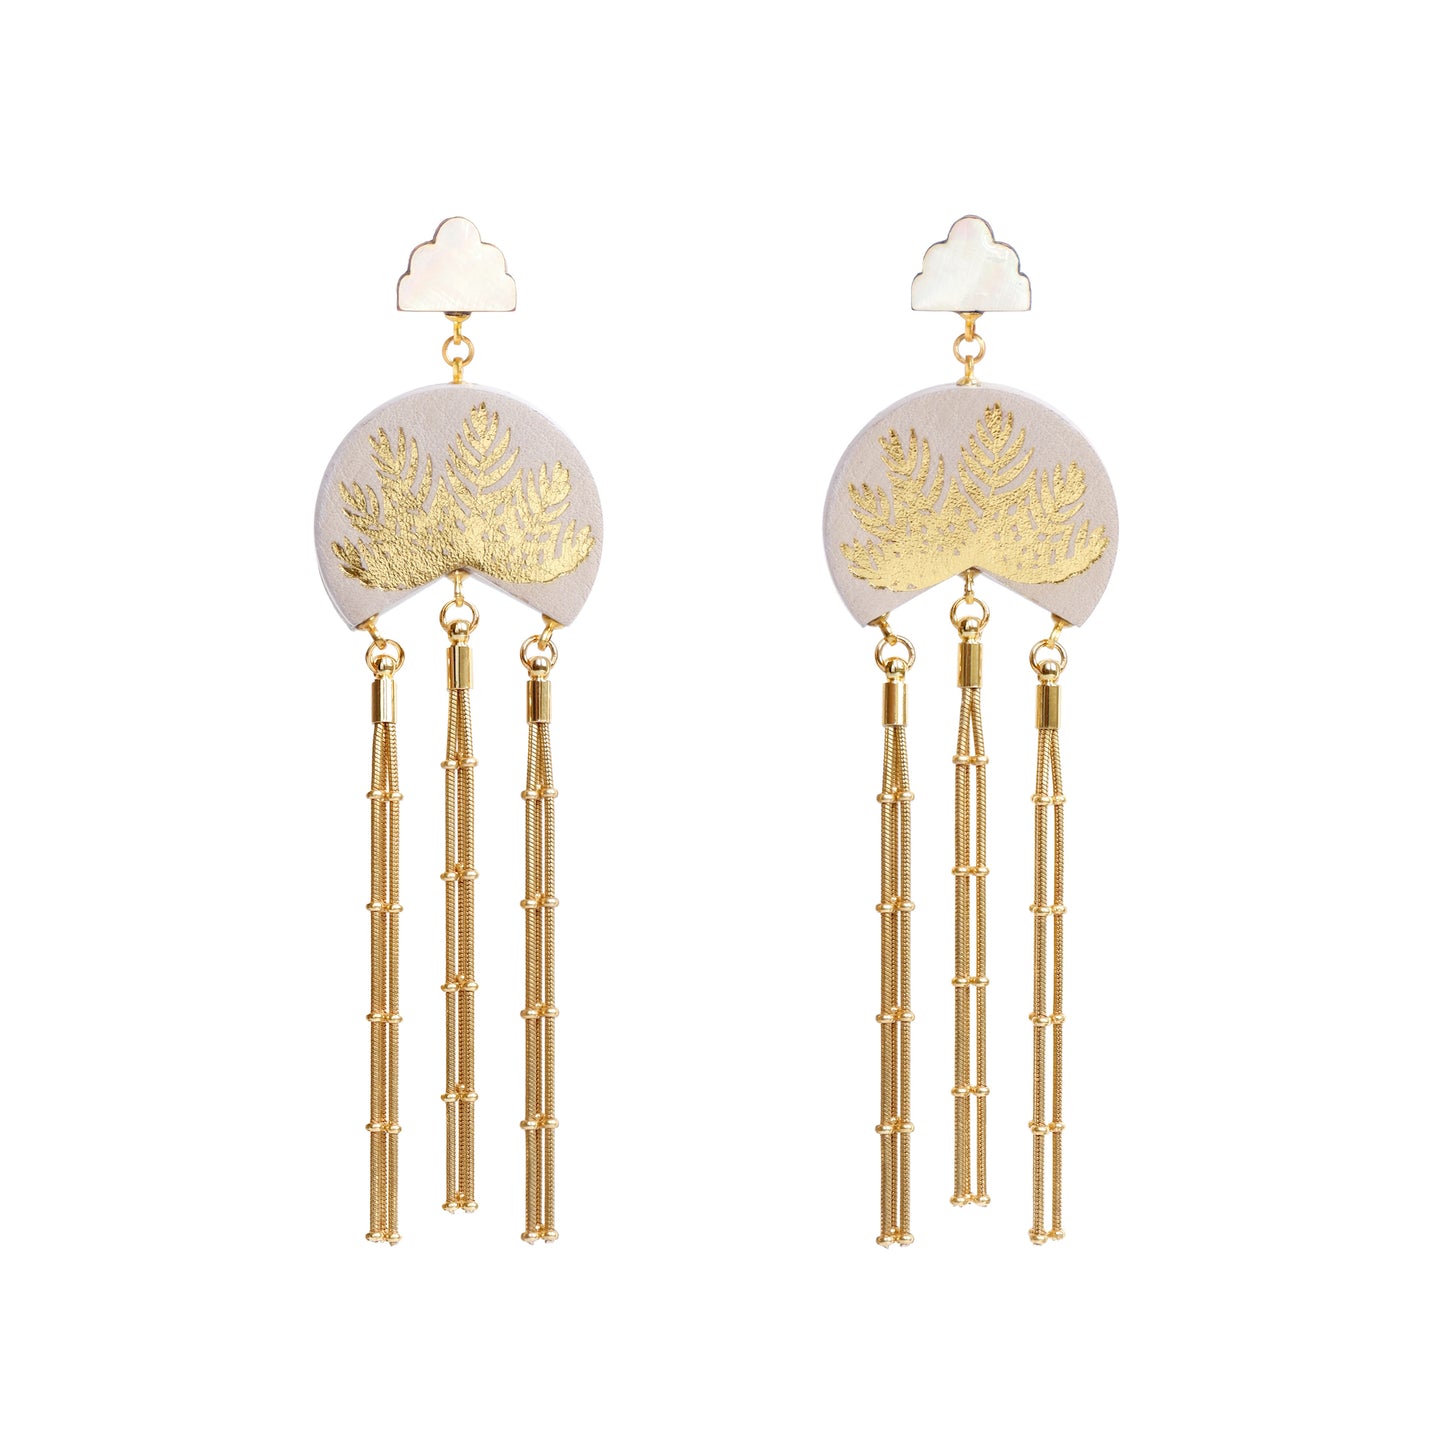 lilac leather medallion earrings, with gold palm tree print, gold tassels & mother of pearl cloud shade studs.